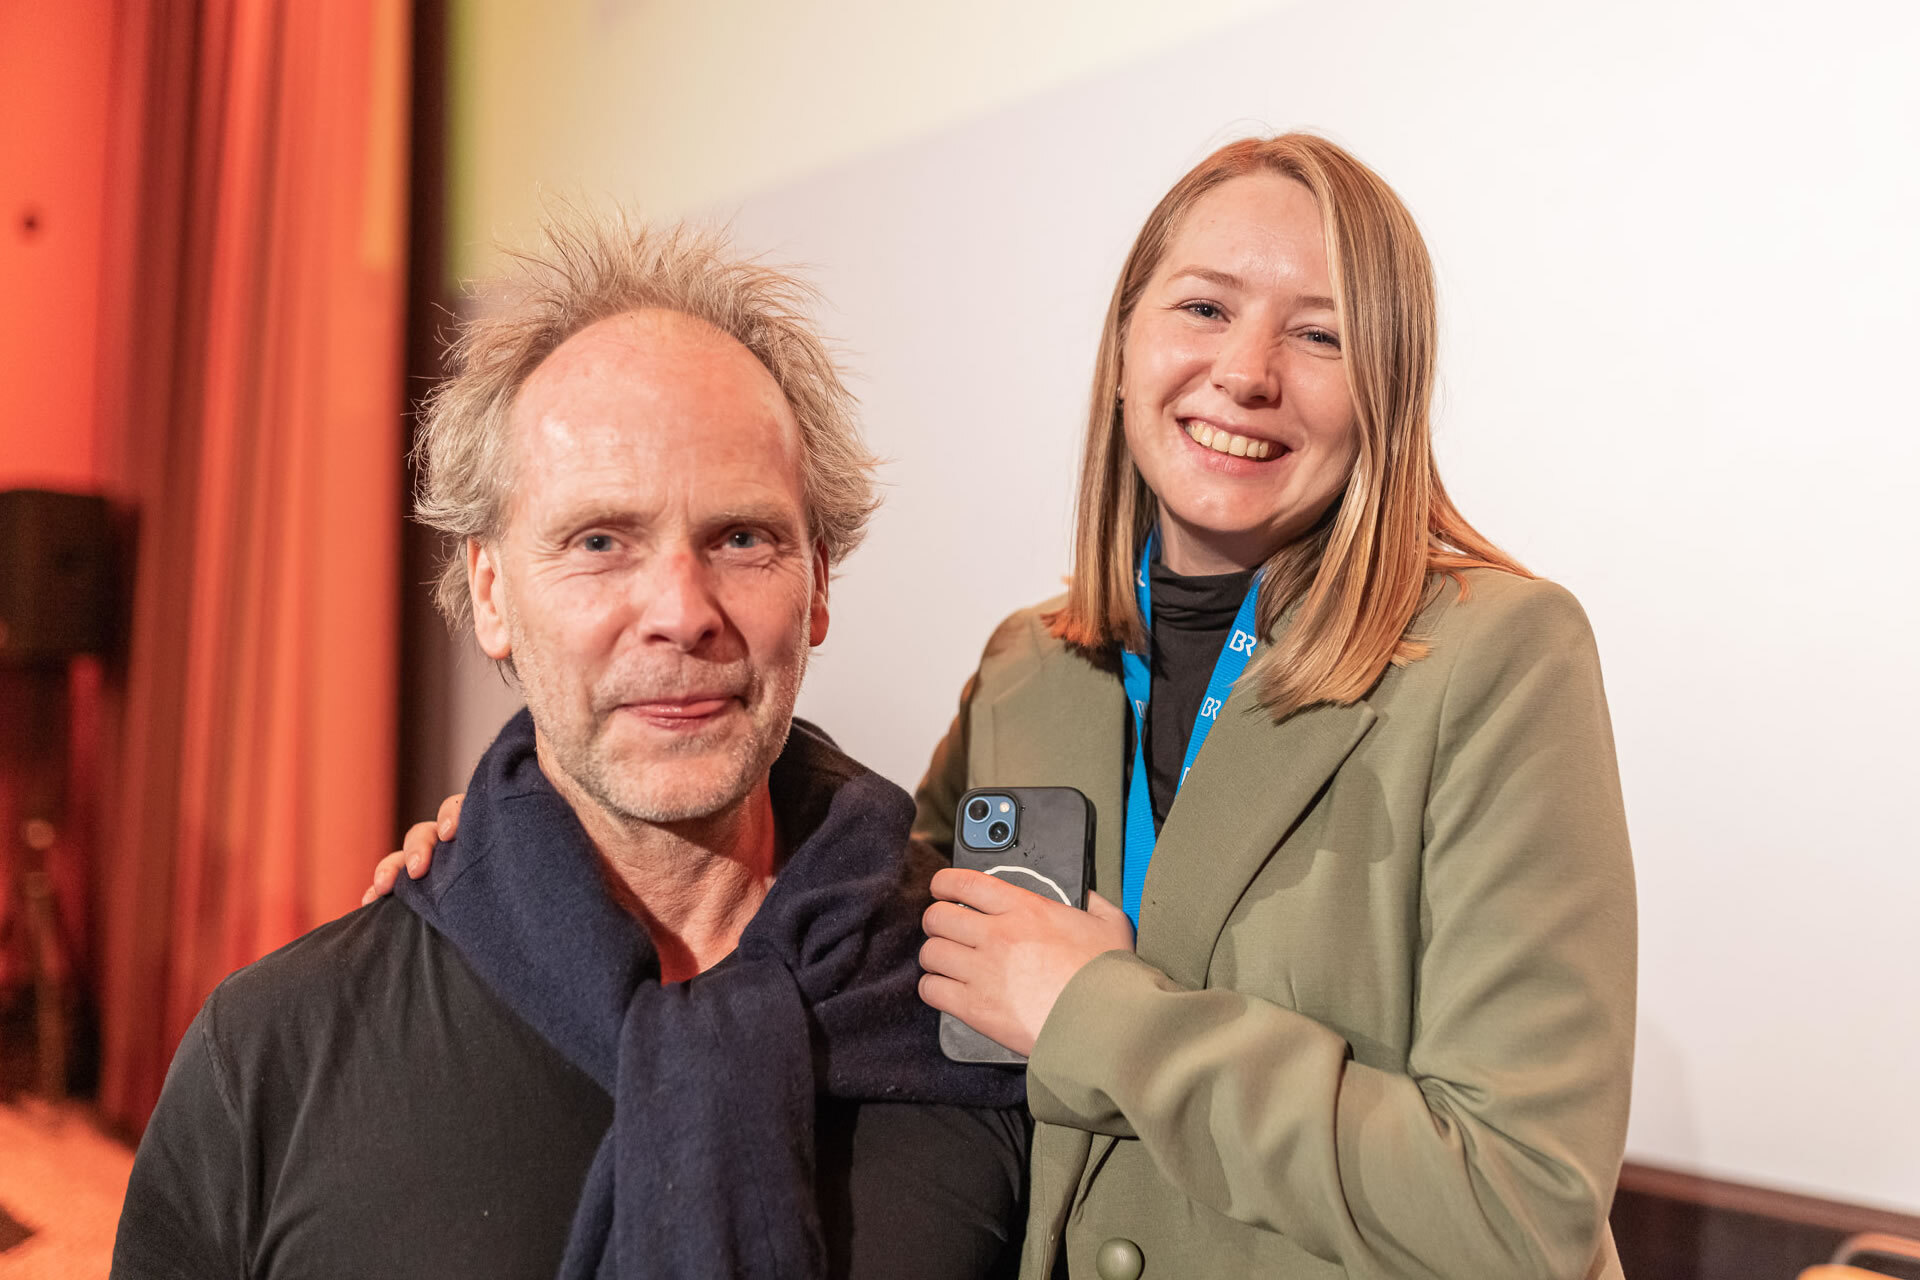 HoF 2022: Director Mariia Shevchenko from INTO THE DARKNESS and Philip Gröning, director, producer and head film department of the the Bavarian Academy of Fine Arts